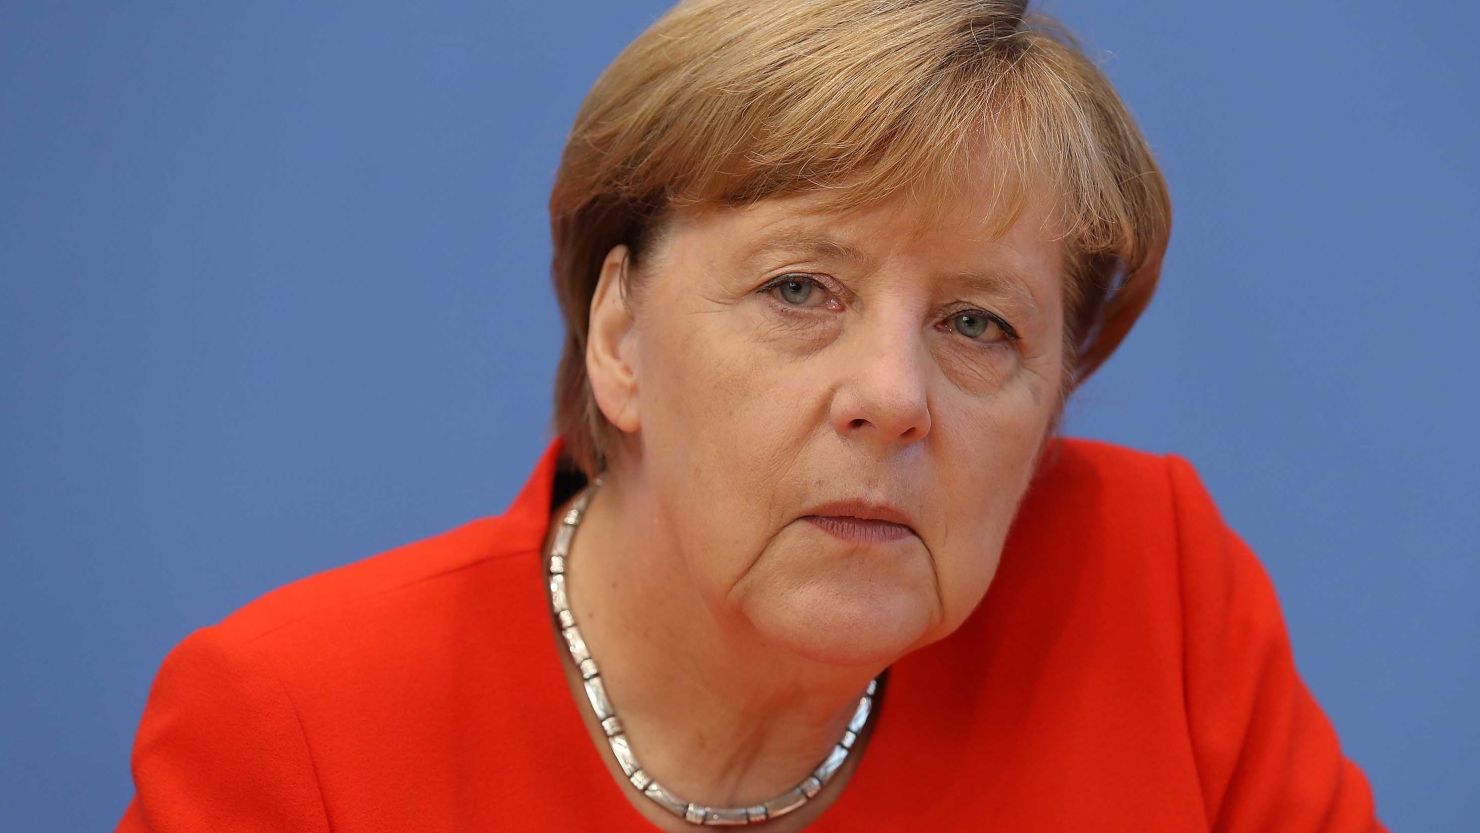 German Chancellor Angela Merkel speaks to the media at her annual press conference.